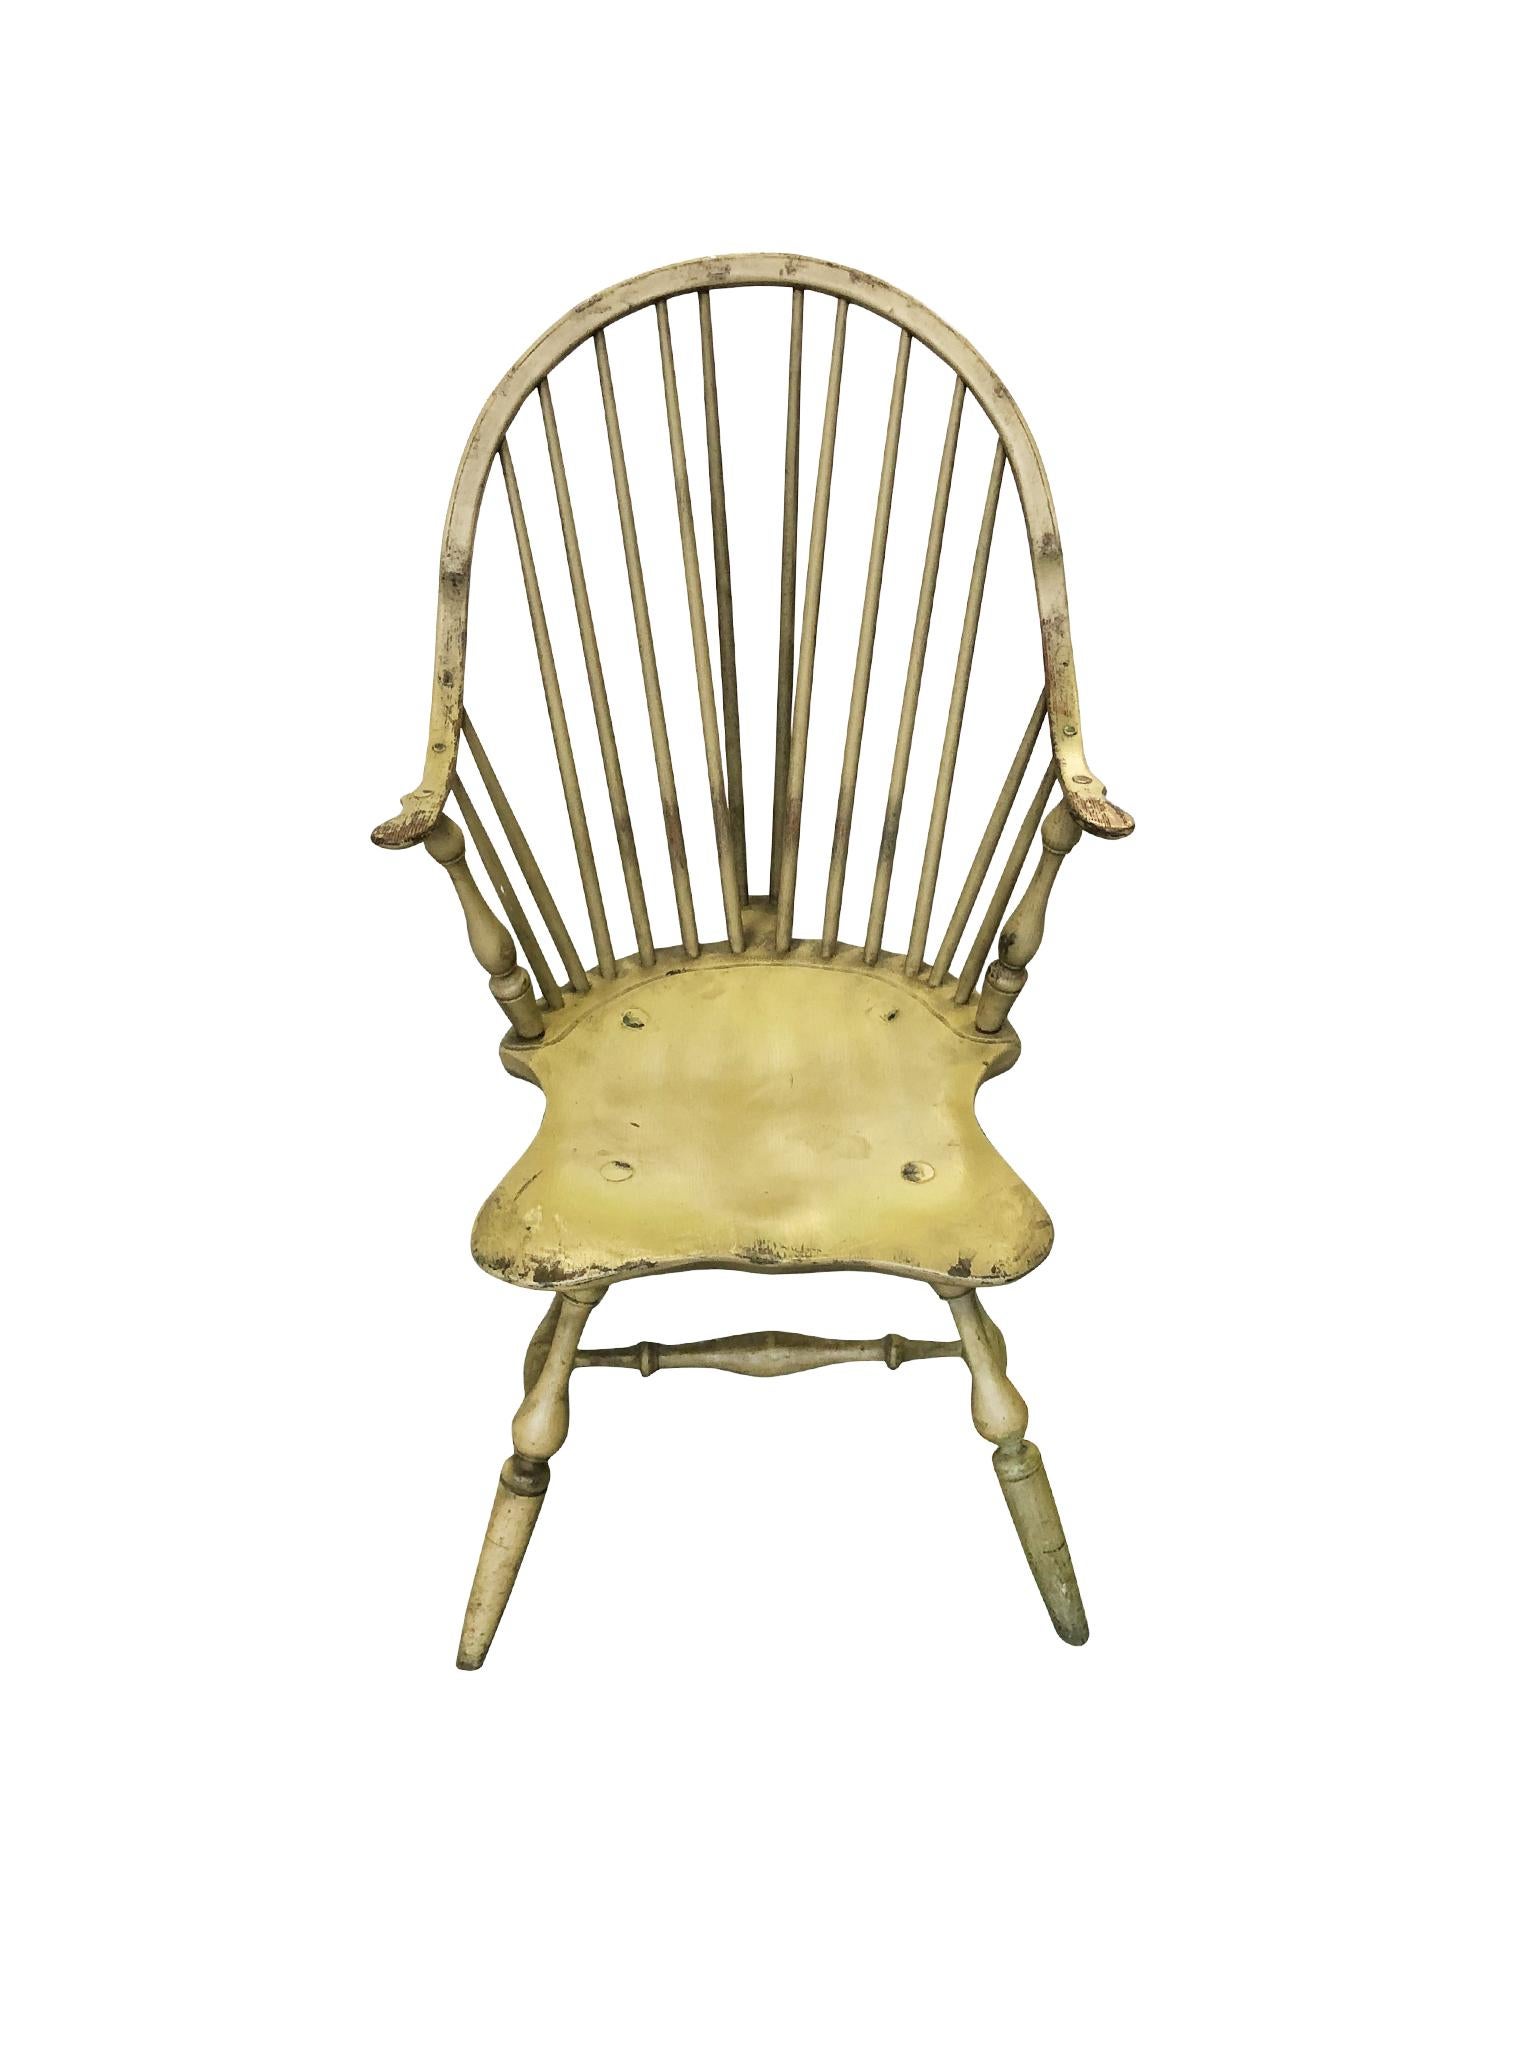 A Windsor chair handcrafted from poplar wood by Bill Wallick. Hand painted in a pale olive-yellow finish. 1980s-1990s. The chair's design is a Classic Windsor shape consisting of a spindle back with a tail piece, and a steam-bent arched crest